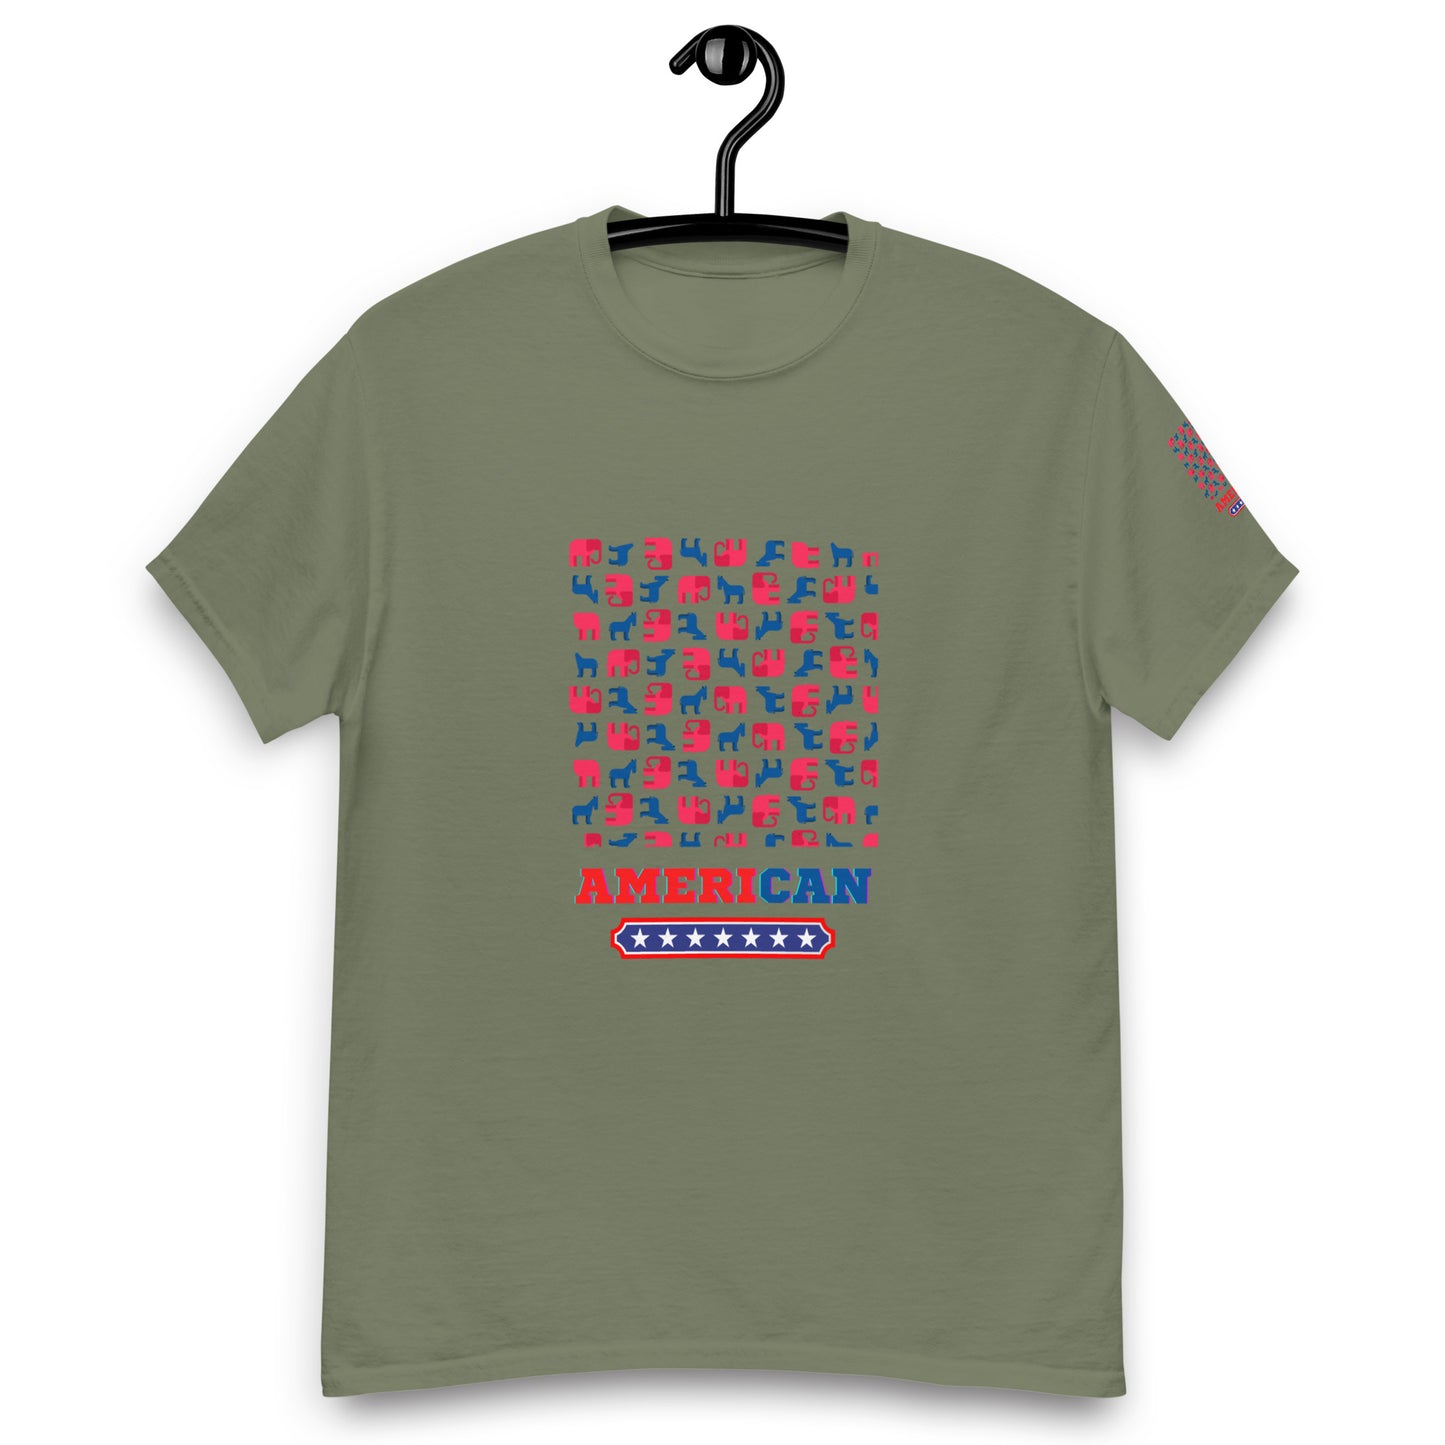 AMERICAN STYLE T–SHIRT "ELEPHANT - THEMED" MILITARY GREEN FRONT - www.firstamericanstore.com